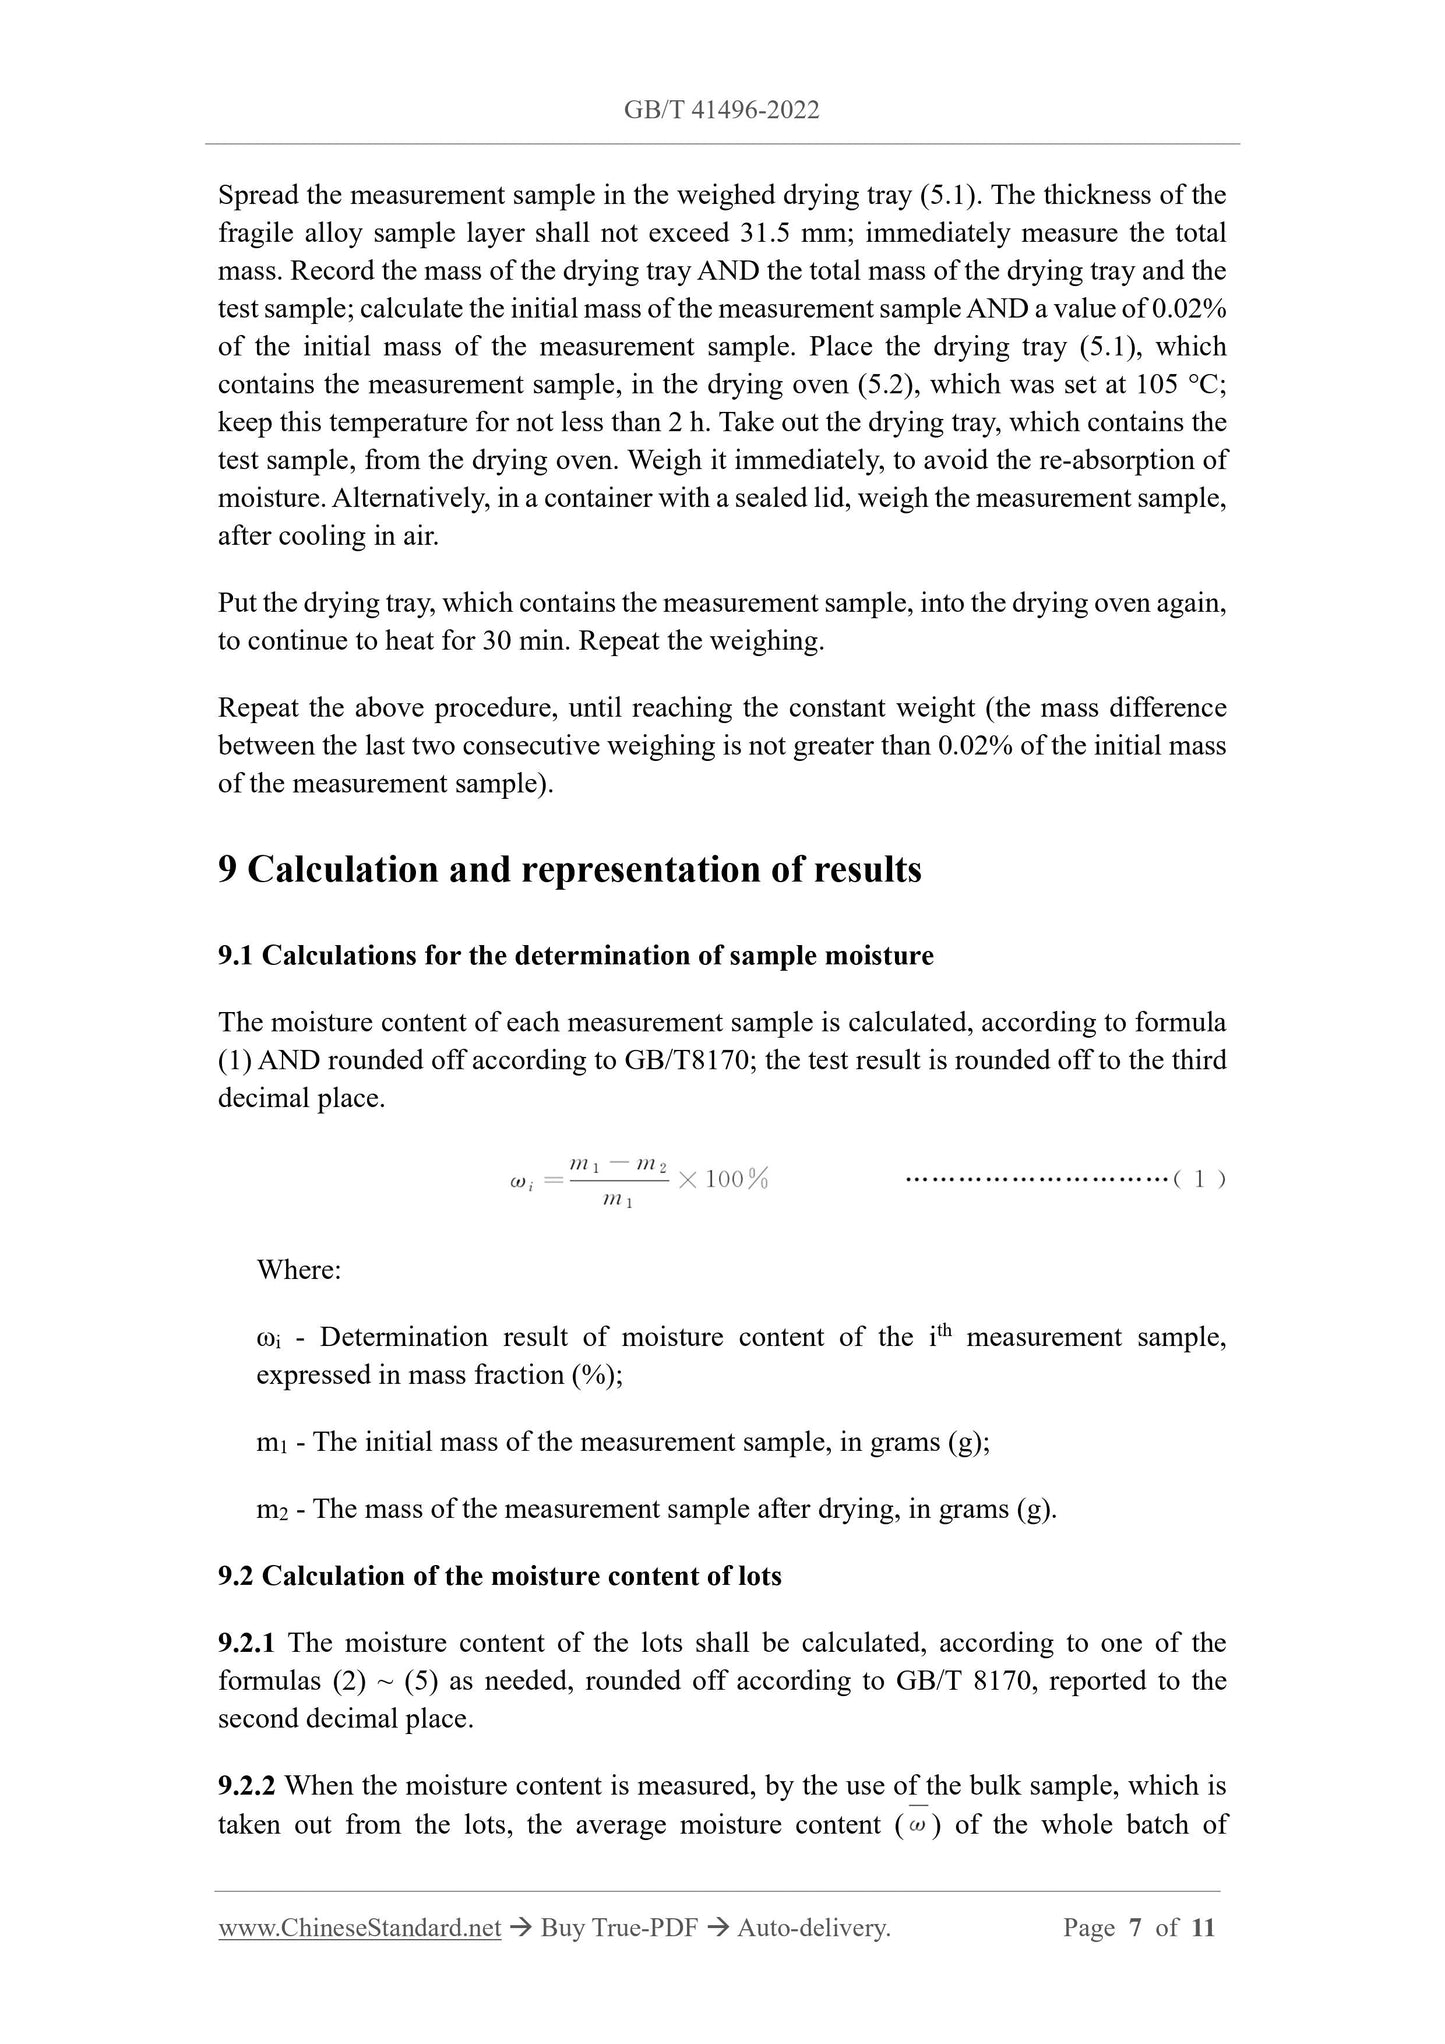 GB/T 41496-2022 Page 5